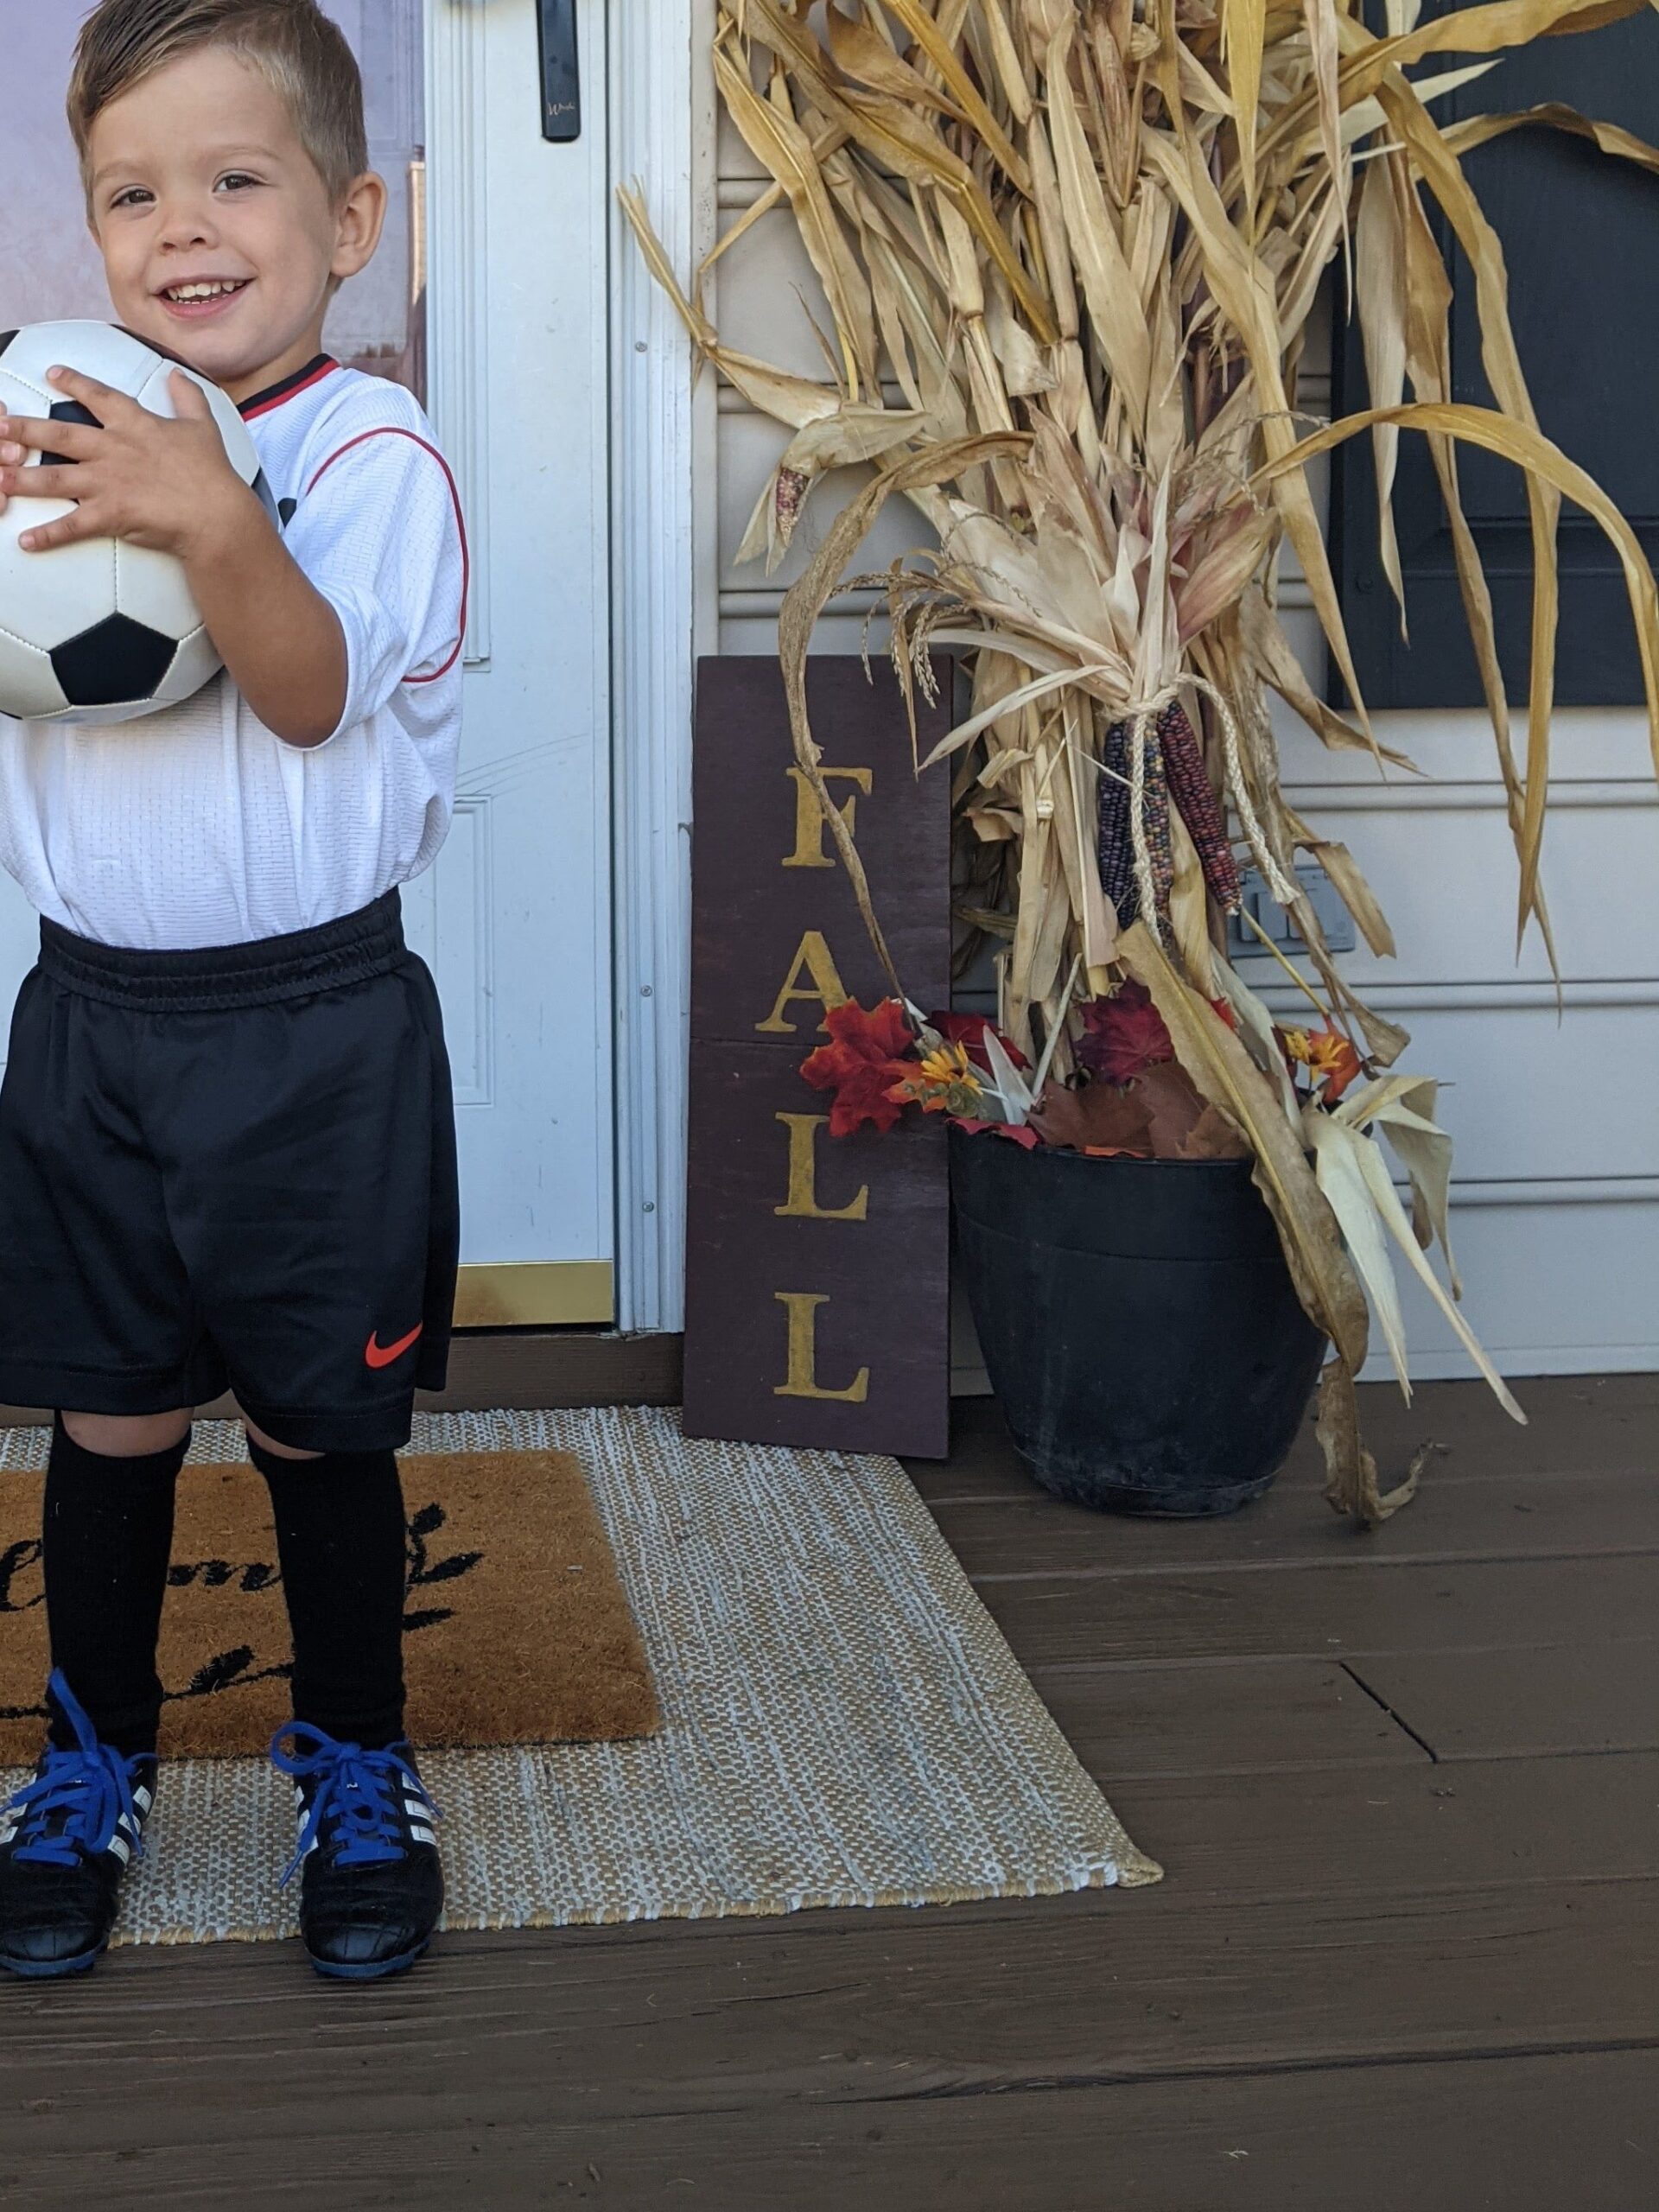 young boy holding a soccer ball in front of  fall decorations that are corn stalks